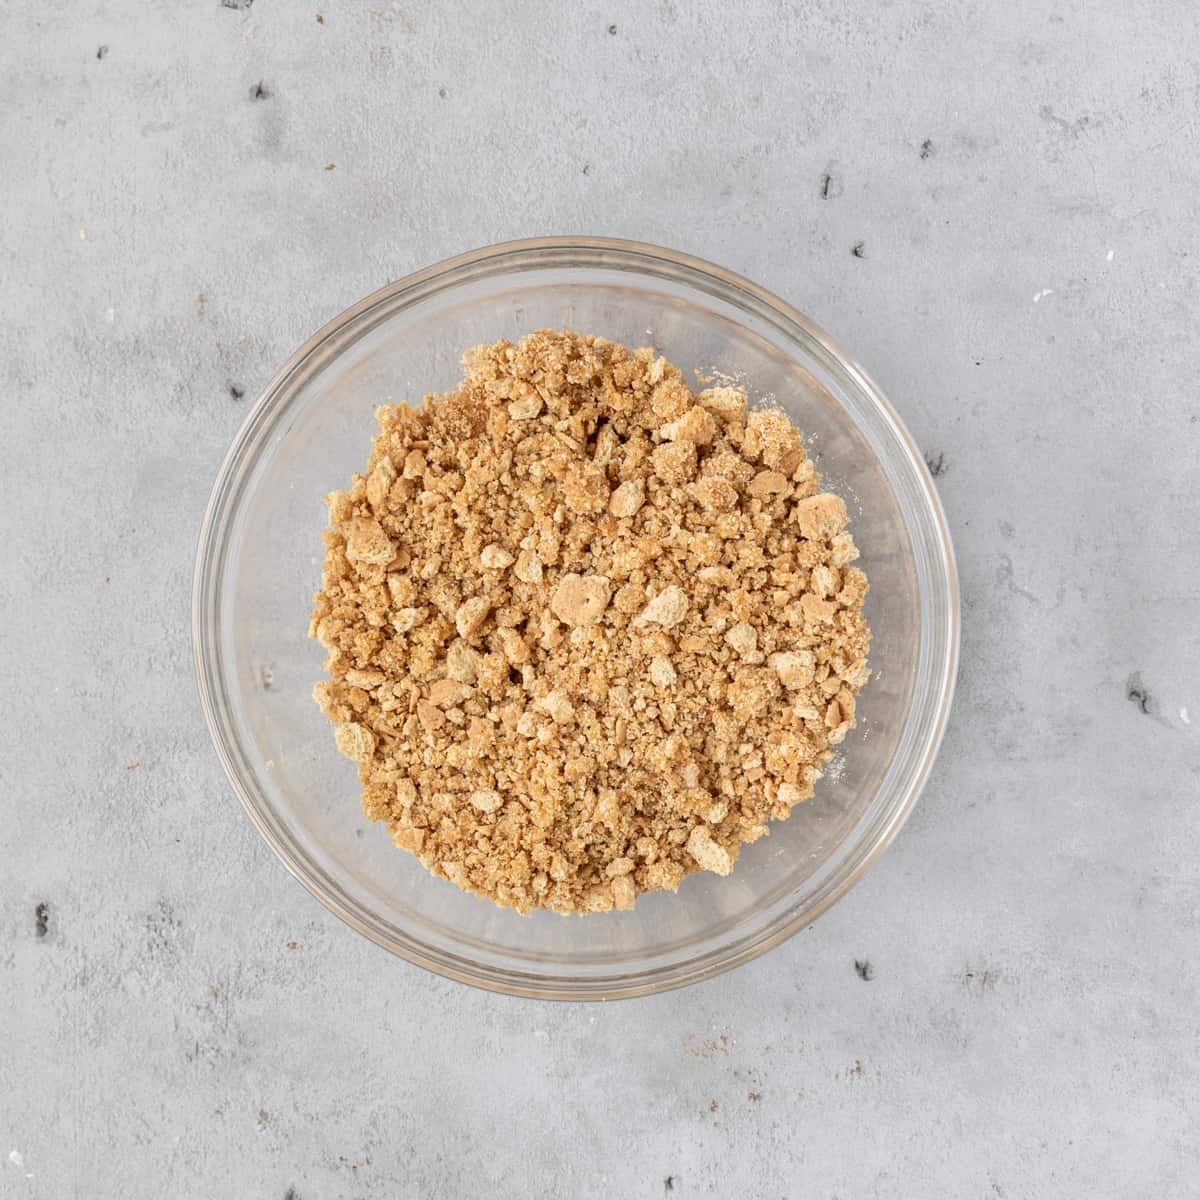 the graham cracker crust mixture in a glass bowl on a grey background.